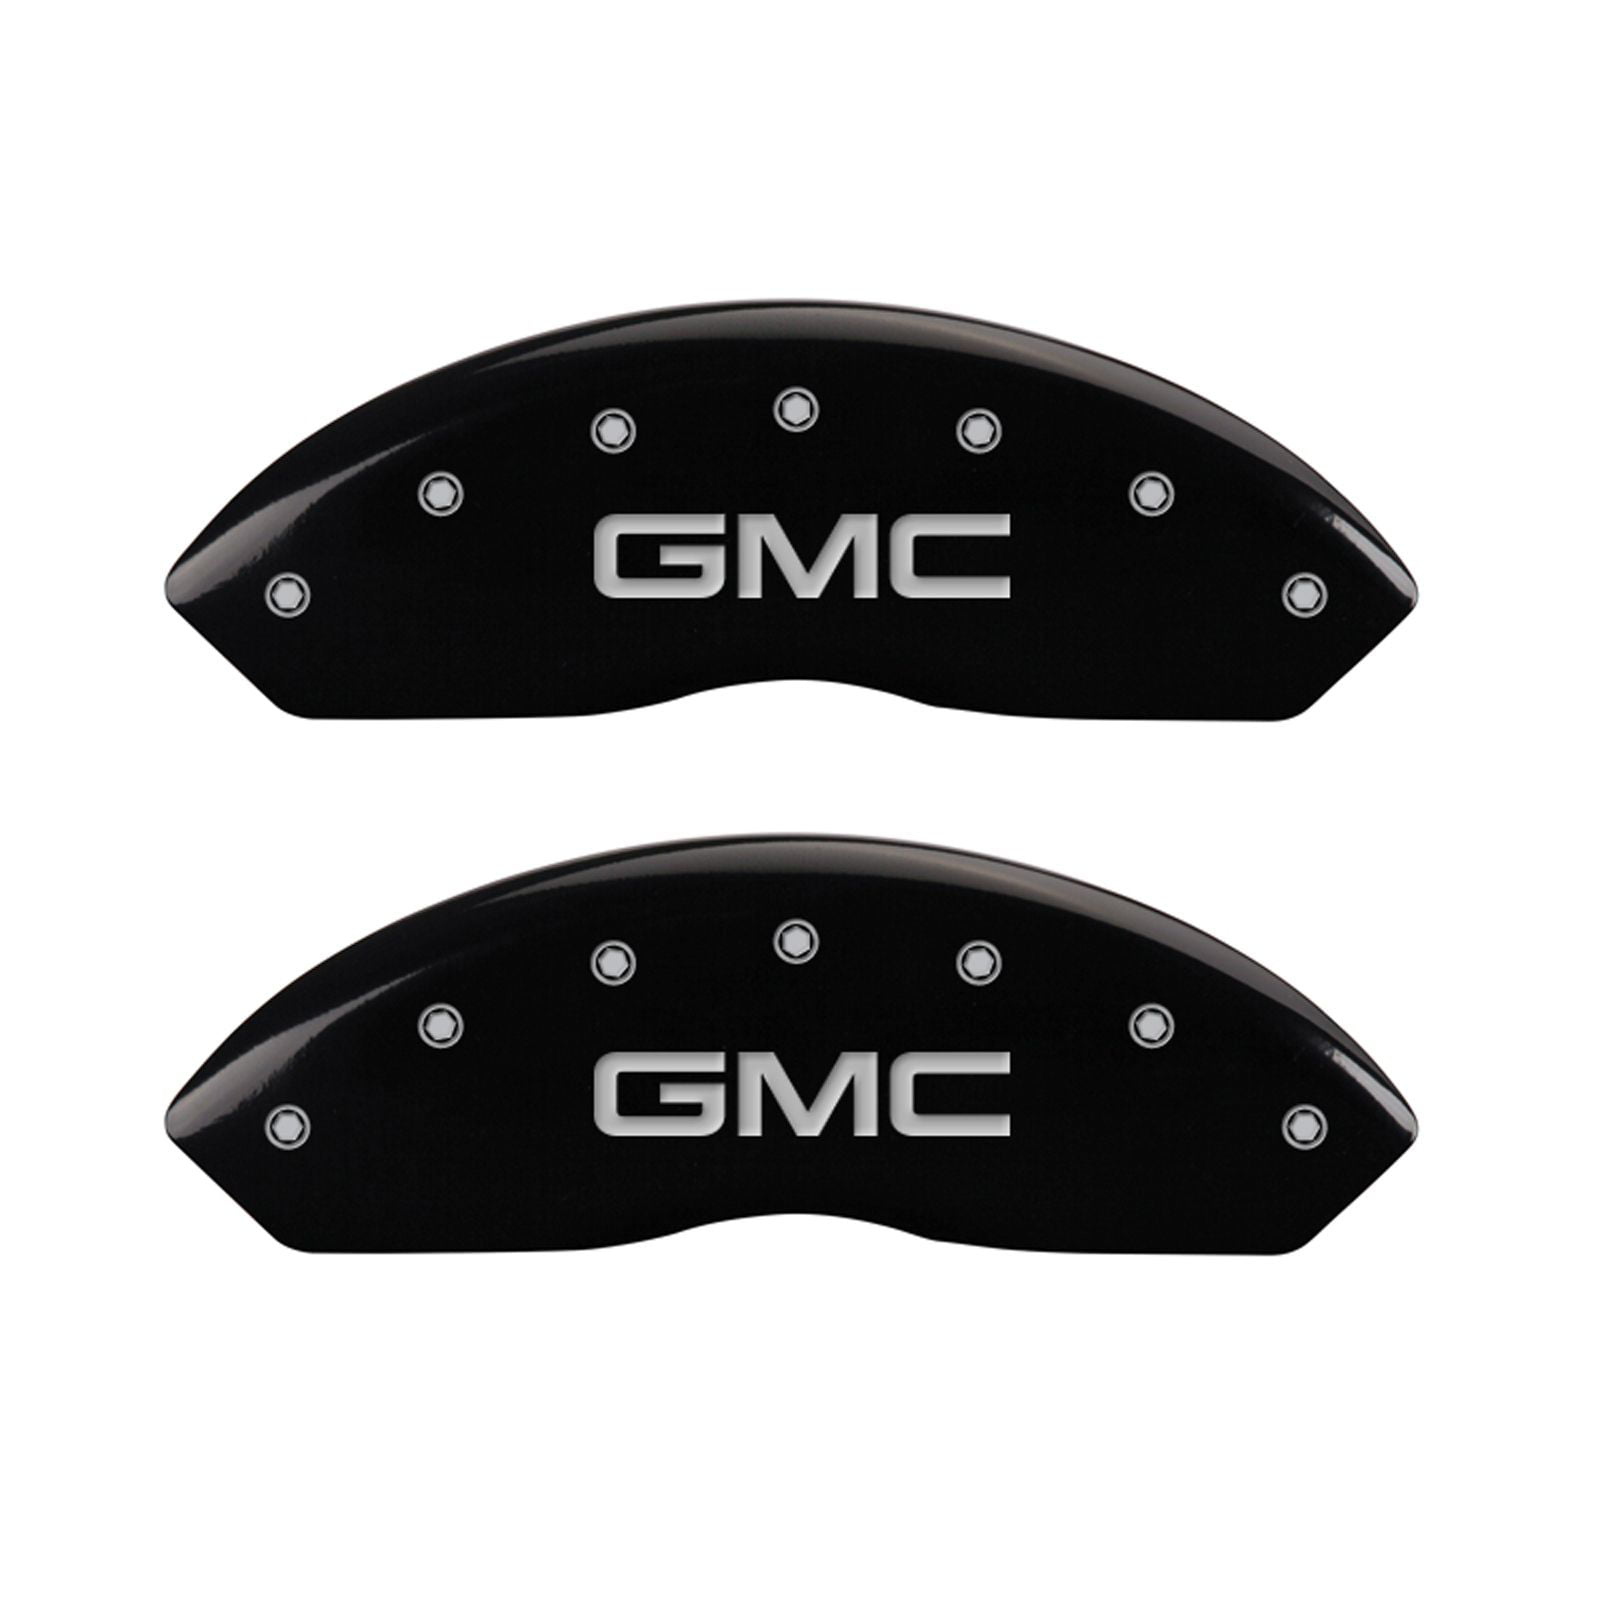 MGP Caliper Covers 34207FGMCBK GMC Engraved Caliper Cover with Black Powder Coat Finish and Silver Characters, Set of 2 